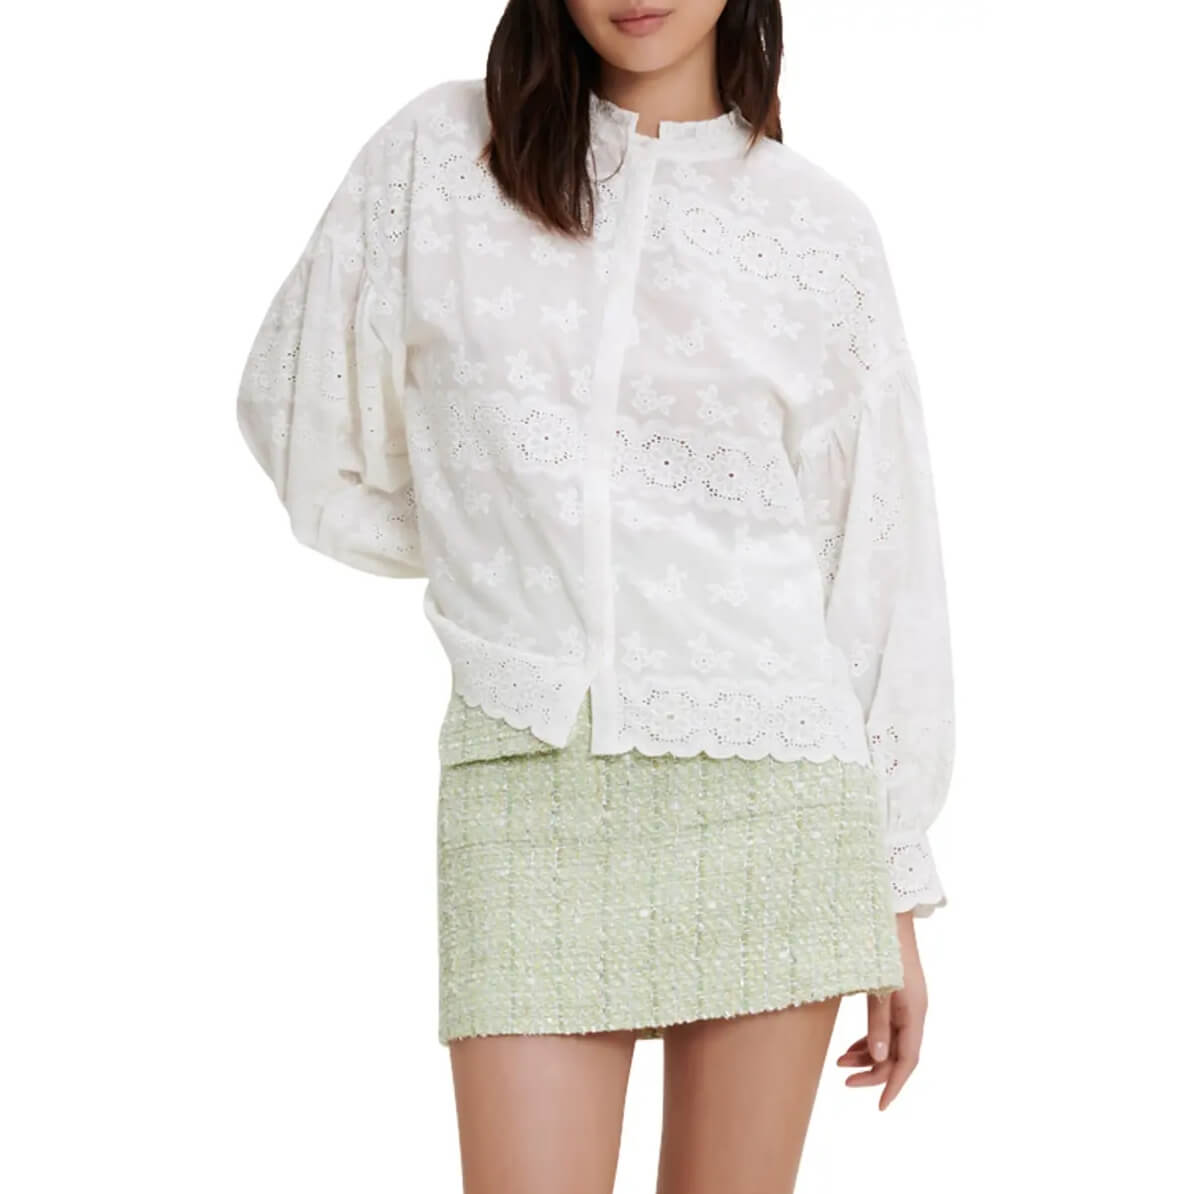 Maje Ceanna Eyelet Embroidered Cotton Shirt